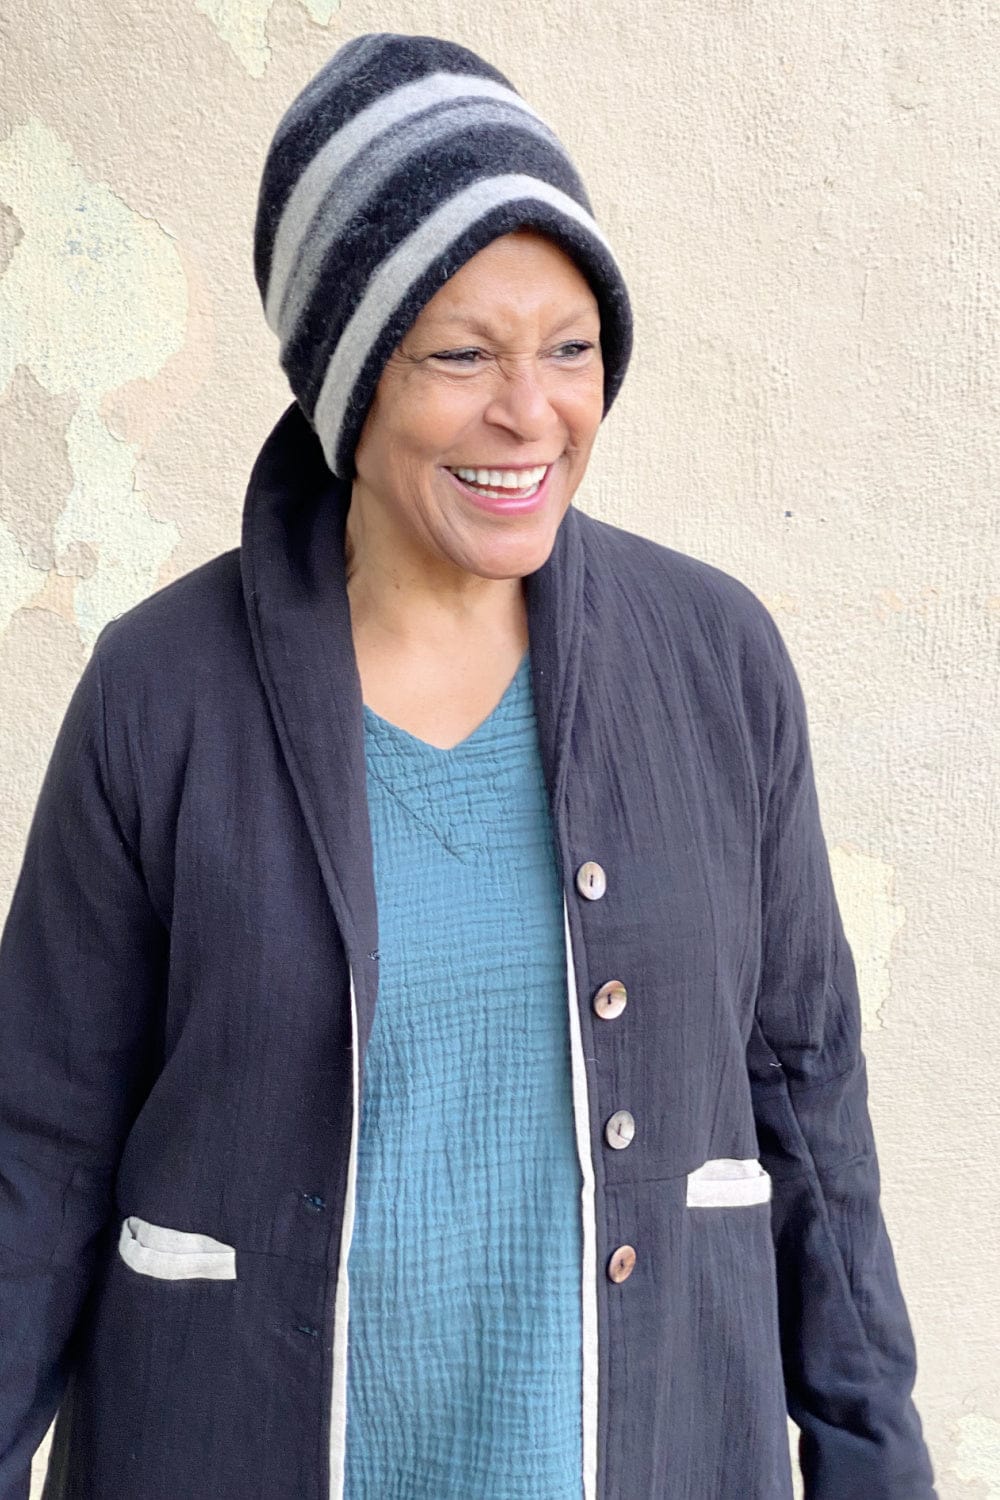 Merino wool cap with grey and black stripes worn on a smiling woman.